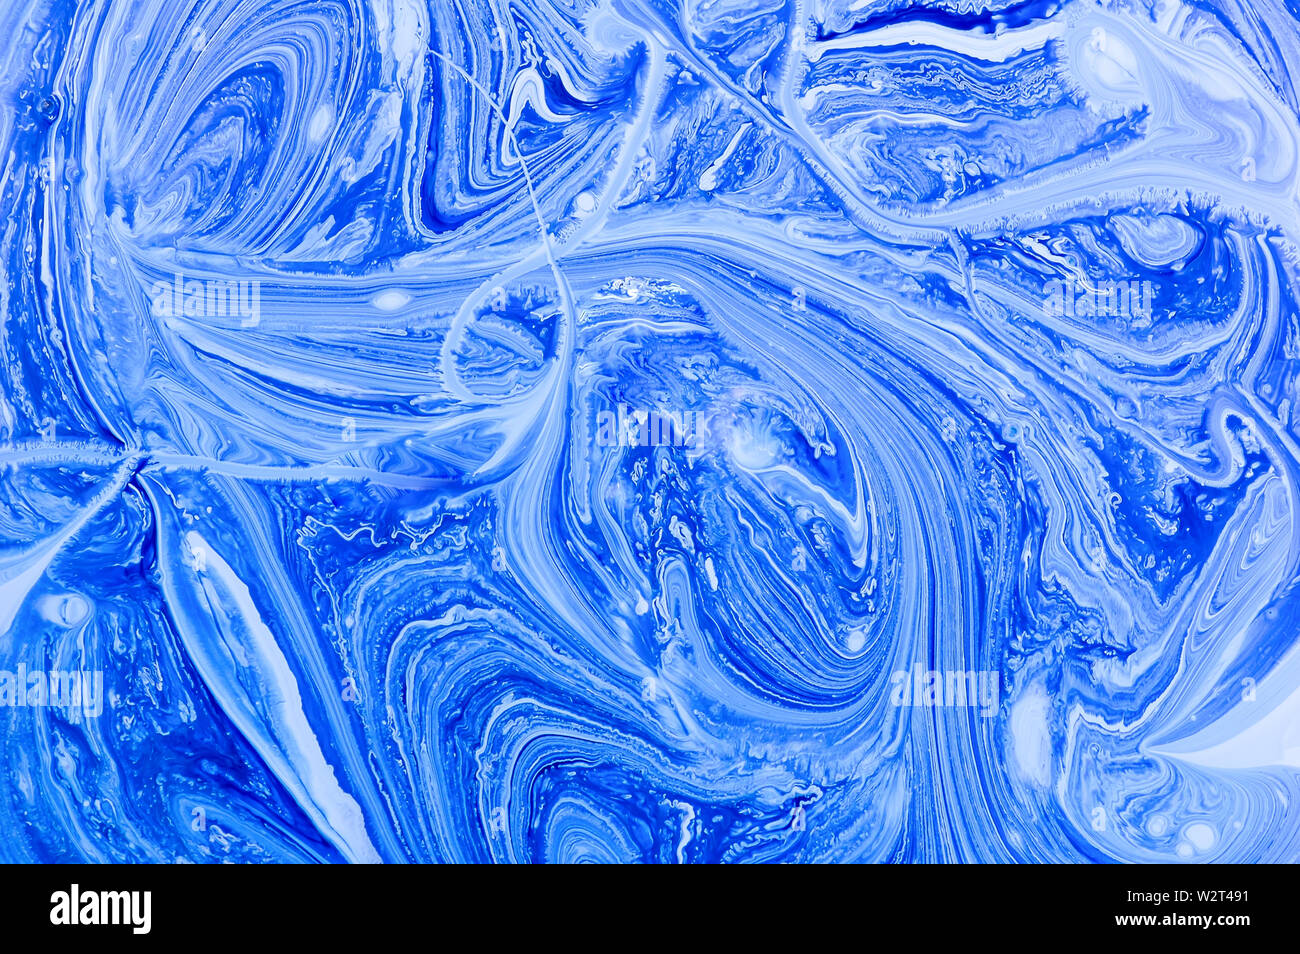 Blue abstract background with marble pattern. Marble liquid acrylic texture. White and blue acrylic paints. Fluid art-marble effect. Stock Photo